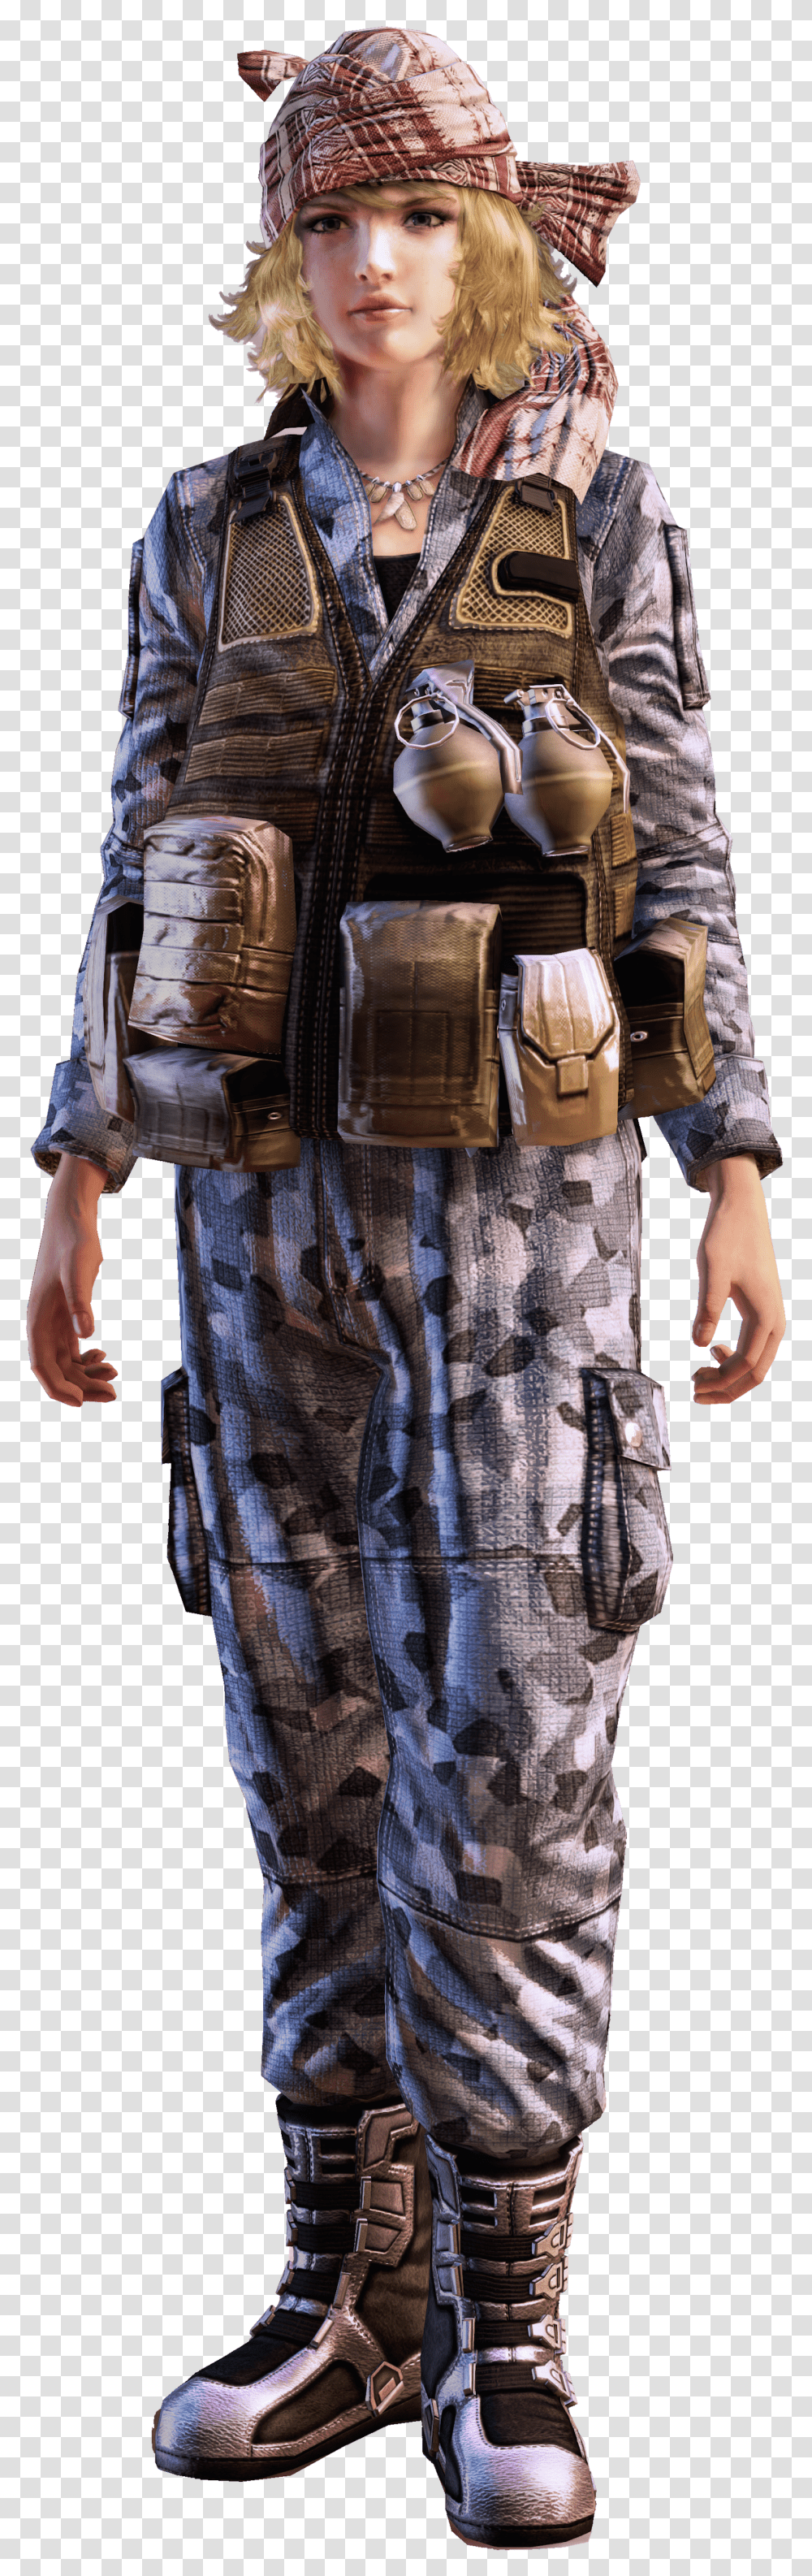 S Third Wiki Breastplate Transparent Png